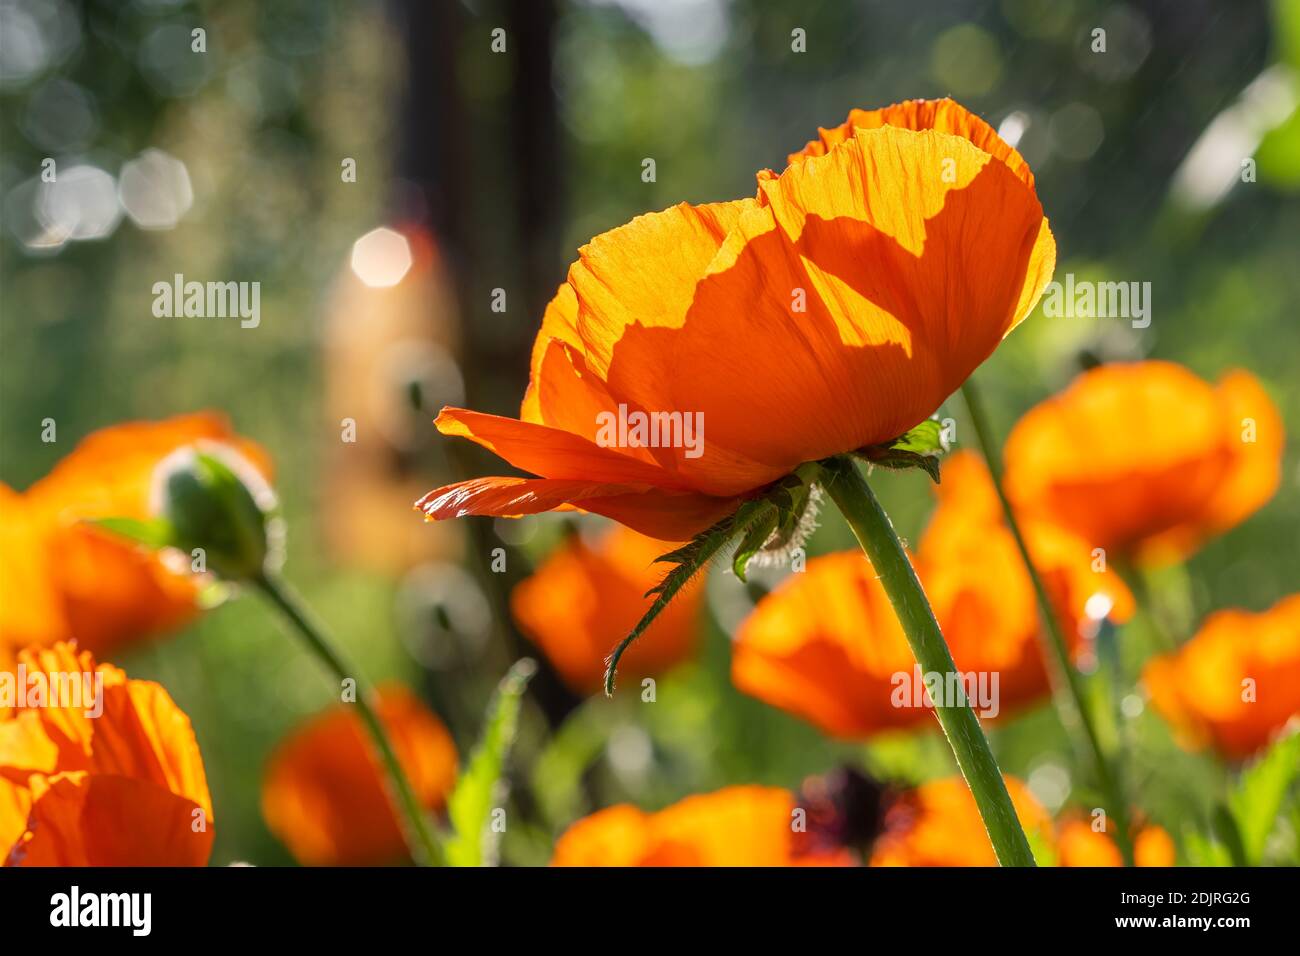 Poppy flowers close-up in green field Stock Photo